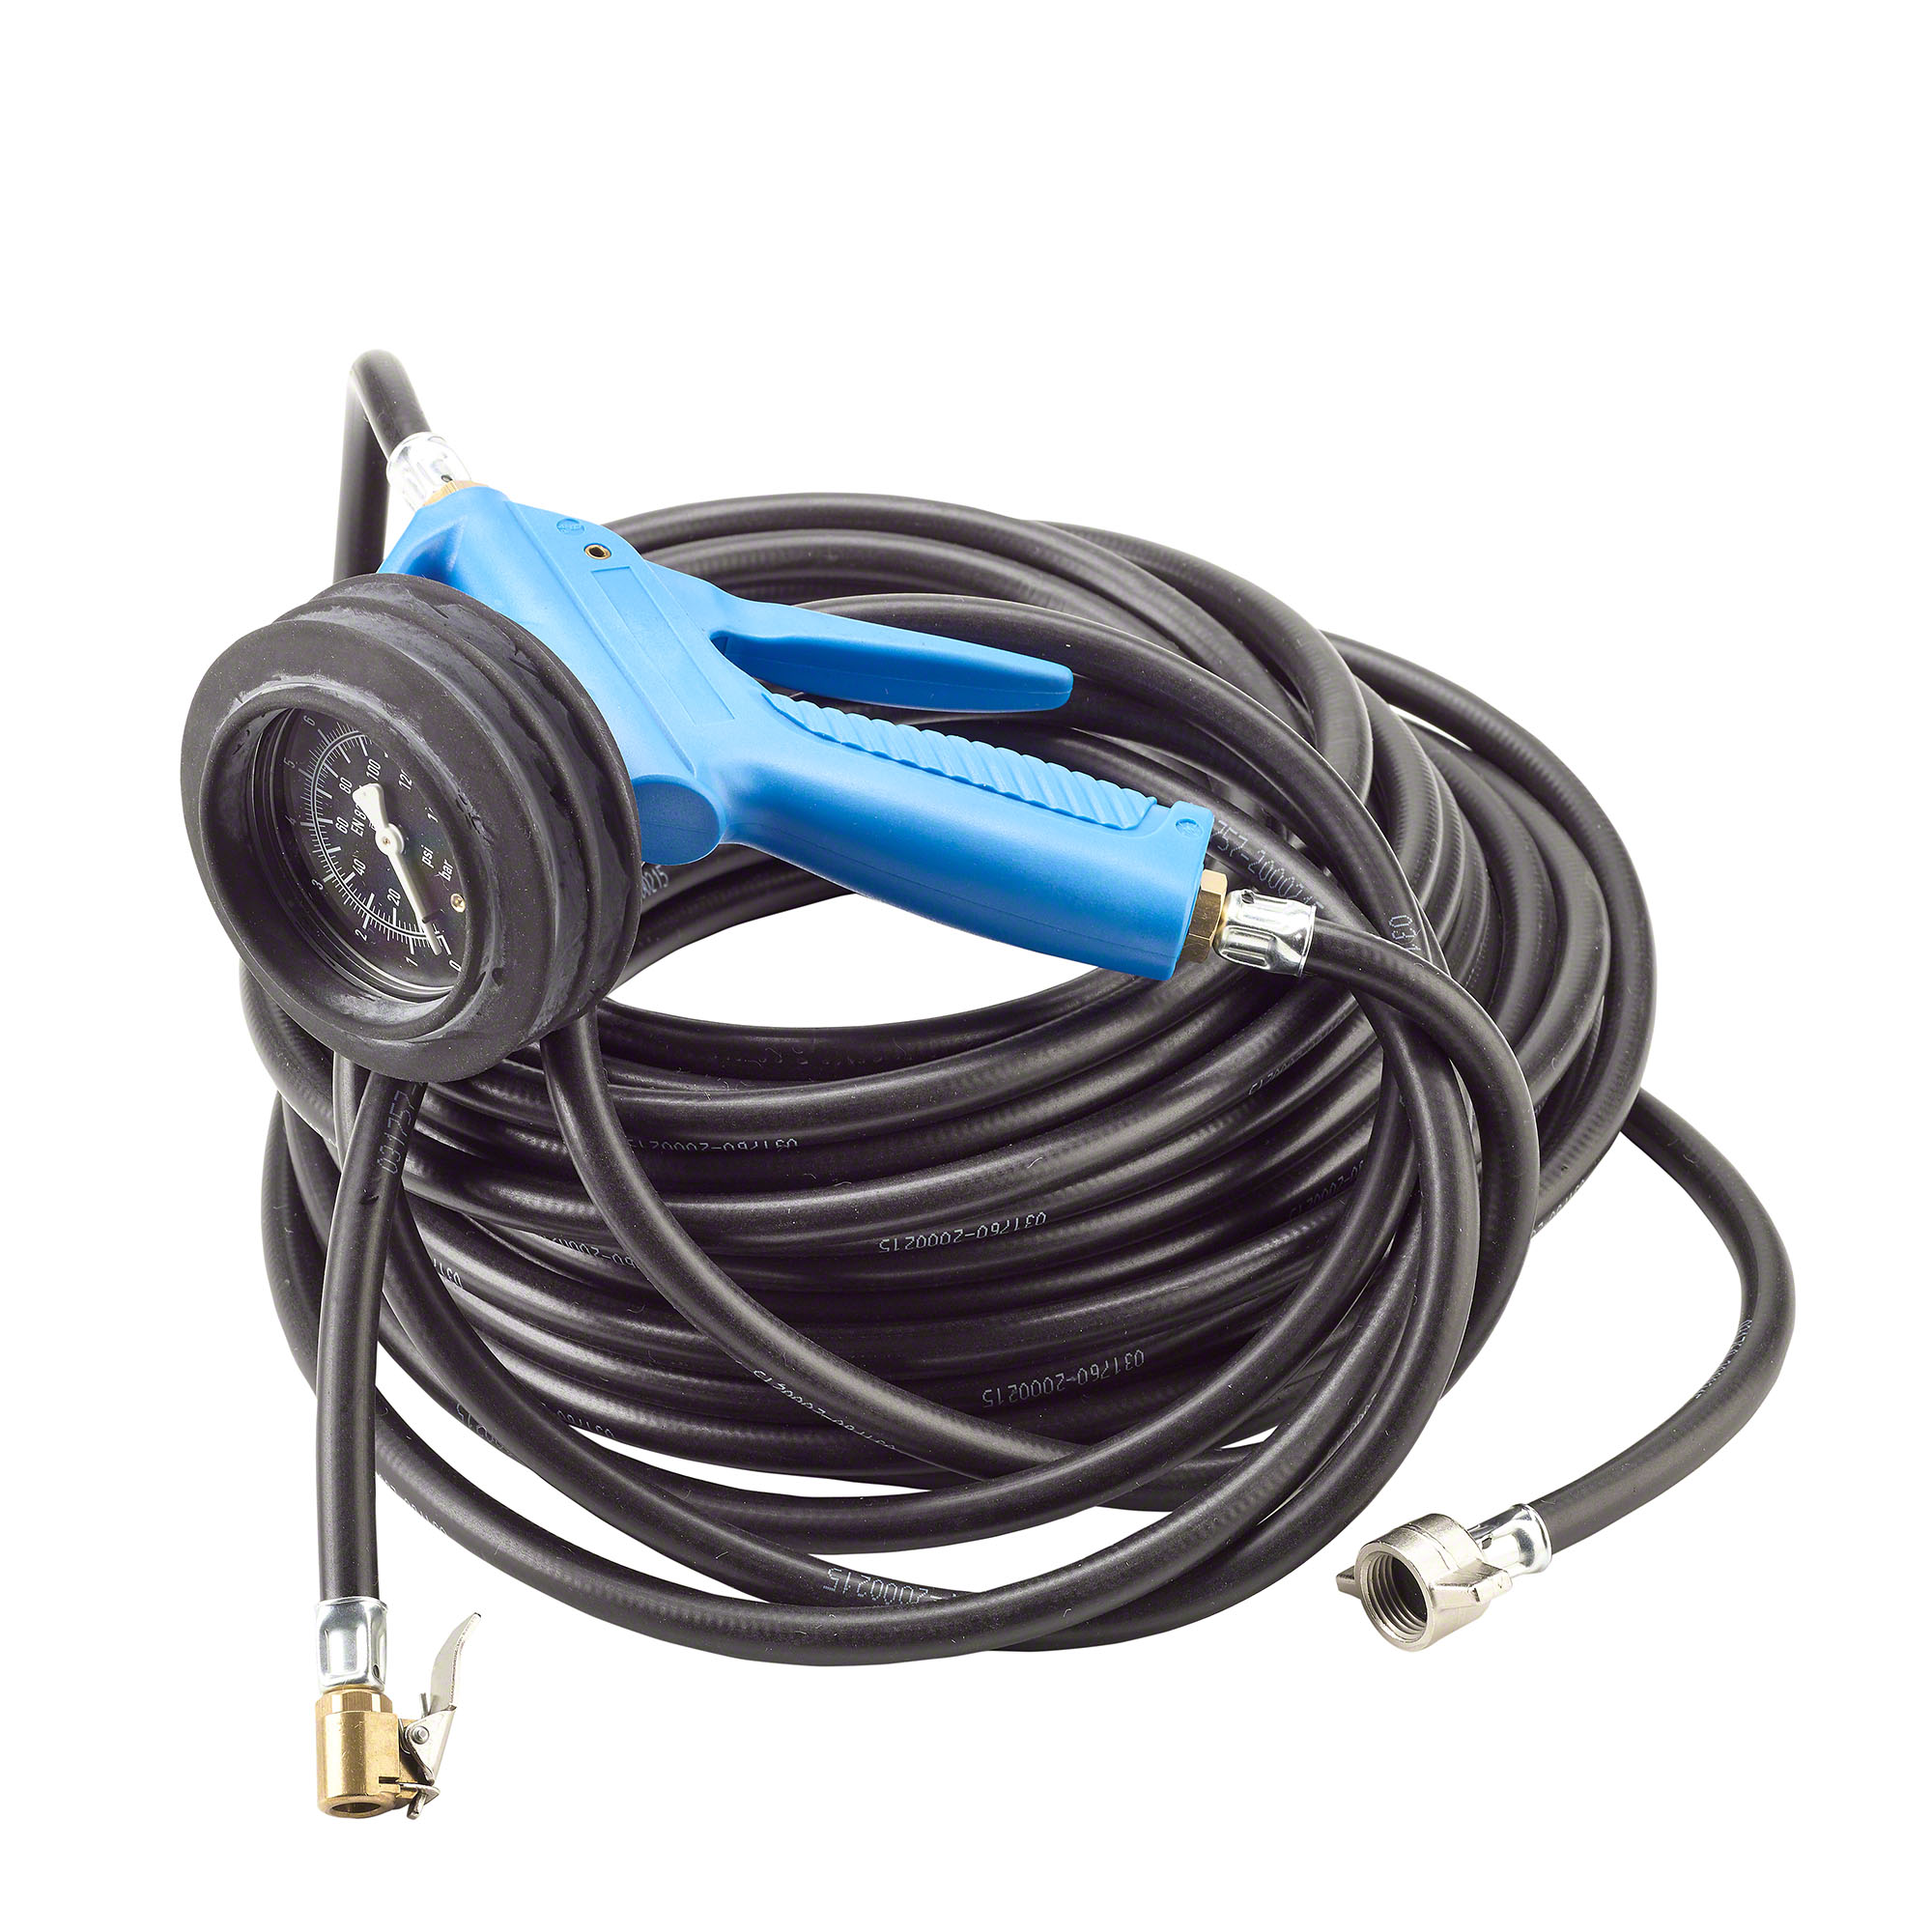 Tyre inflator hose - 1.5 m, with tyre filler